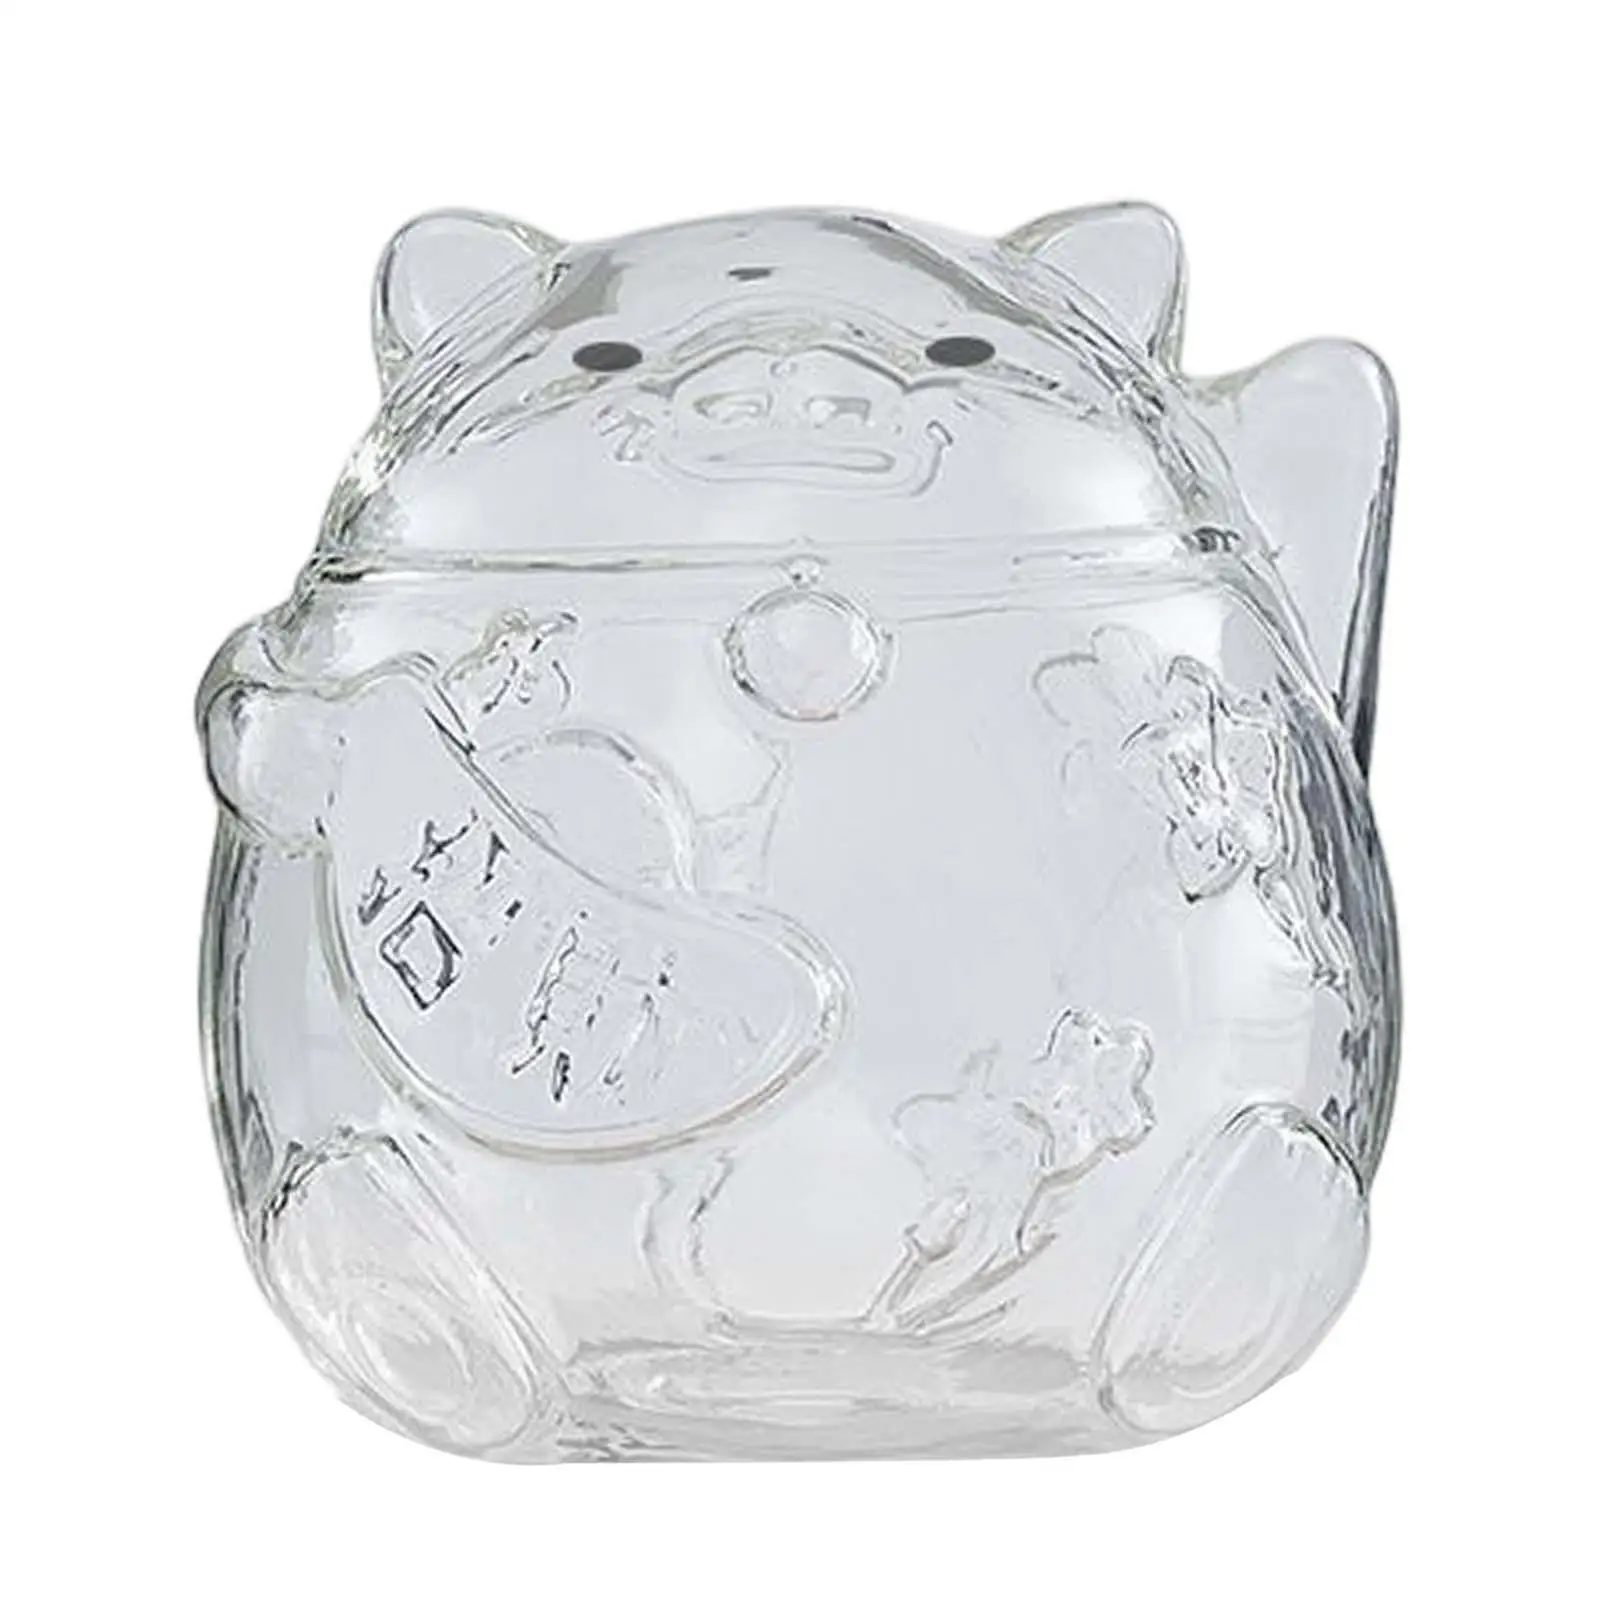 Clear Lucky Cat Piggy Bank Money Box Decorative for Gift party Boys Children